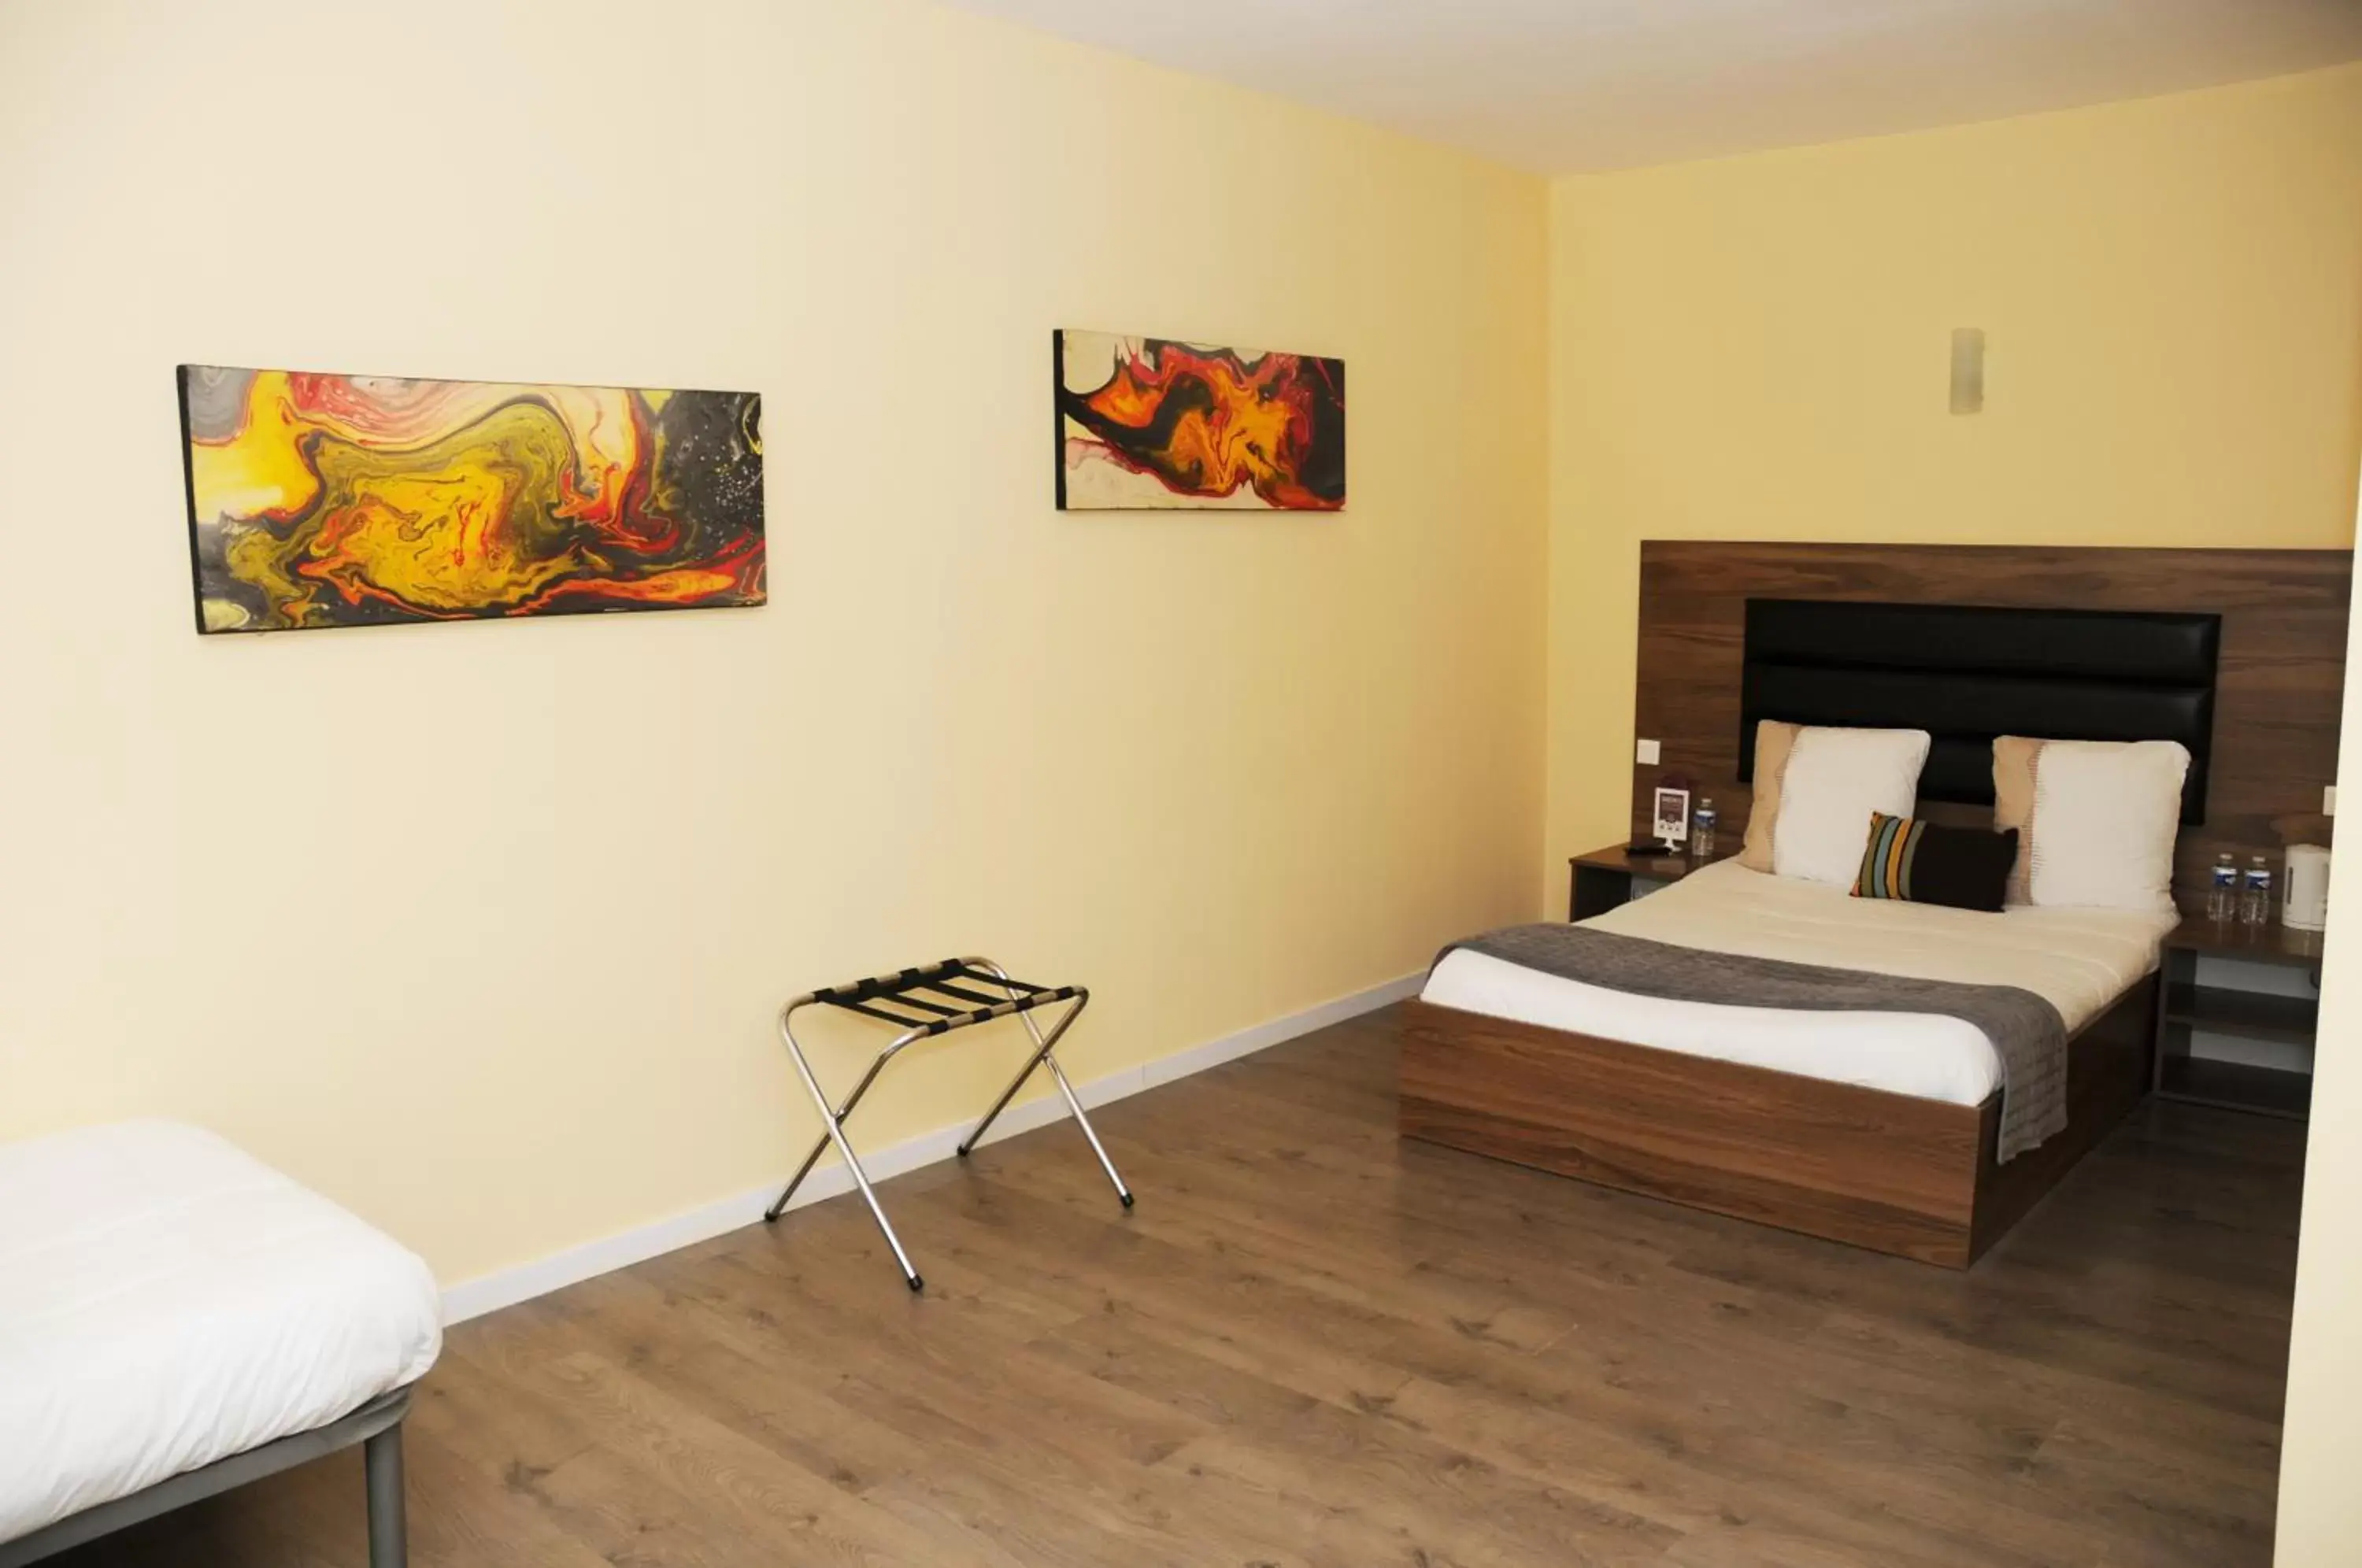 Bed, Room Photo in Kyriad Direct Morez